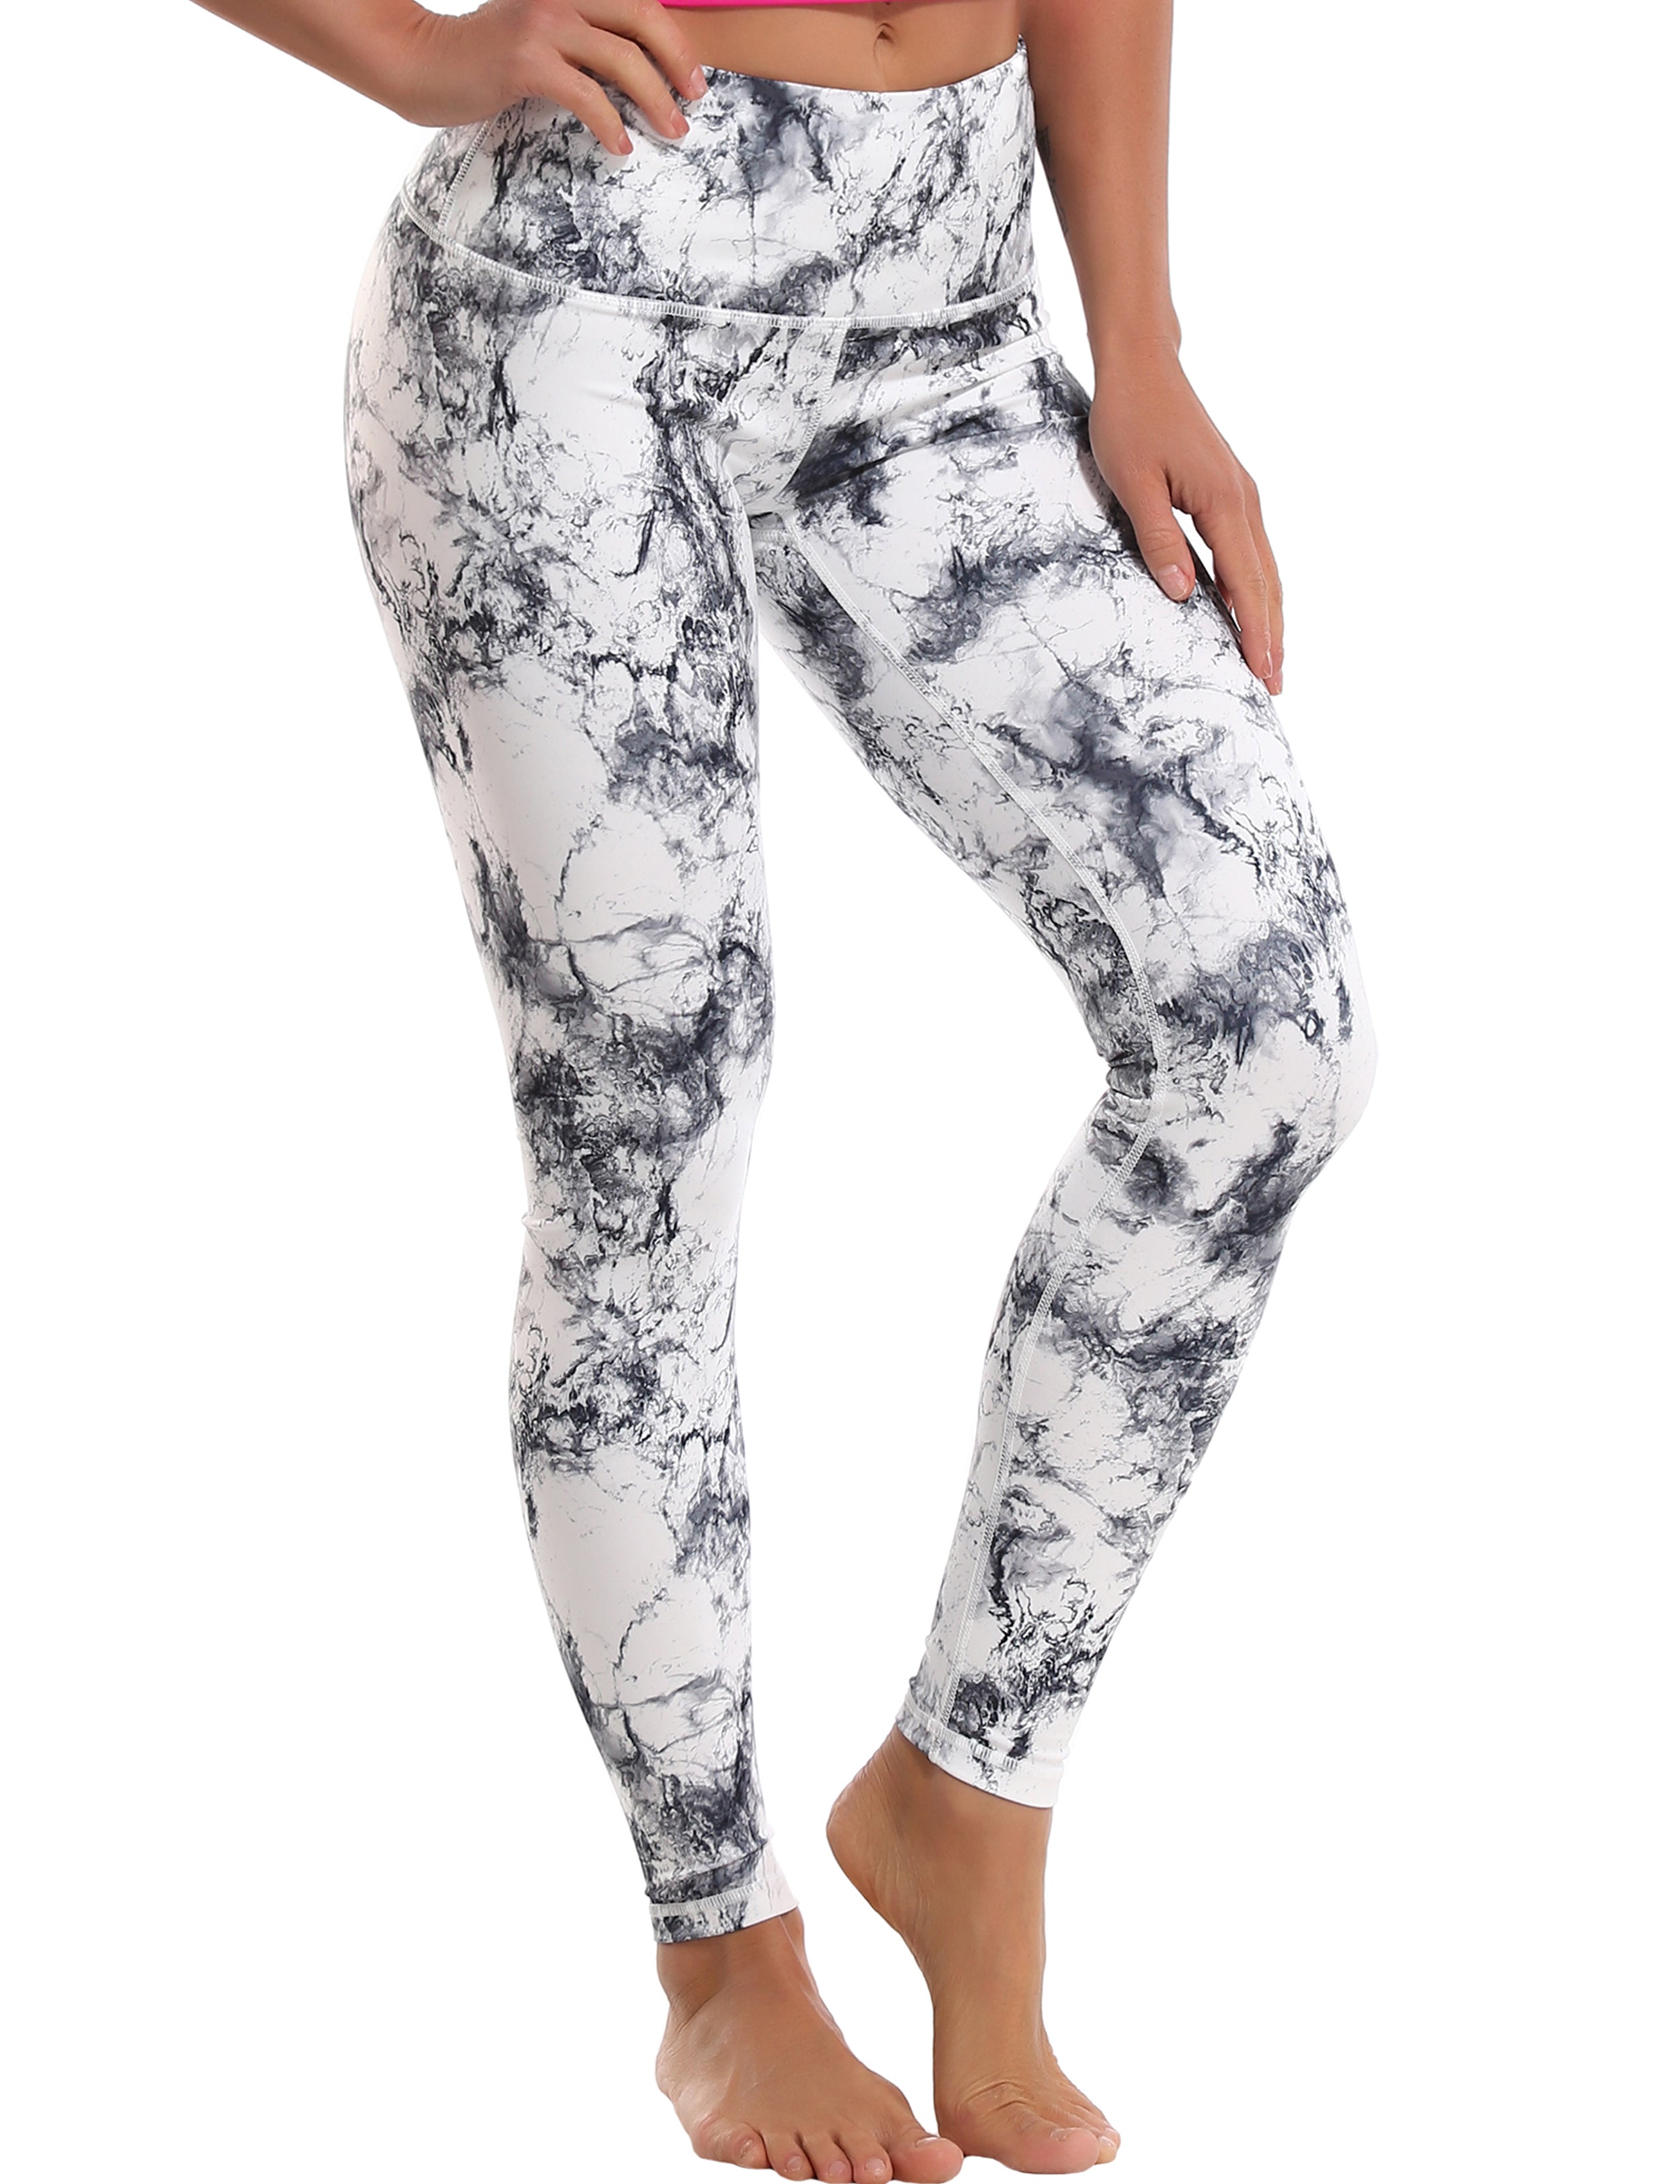 High Waist Running Pants arabescato 82%Polyester/18%Spandex Fabric doesn't attract lint easily 4-way stretch No see-through Moisture-wicking Tummy control Inner pocket